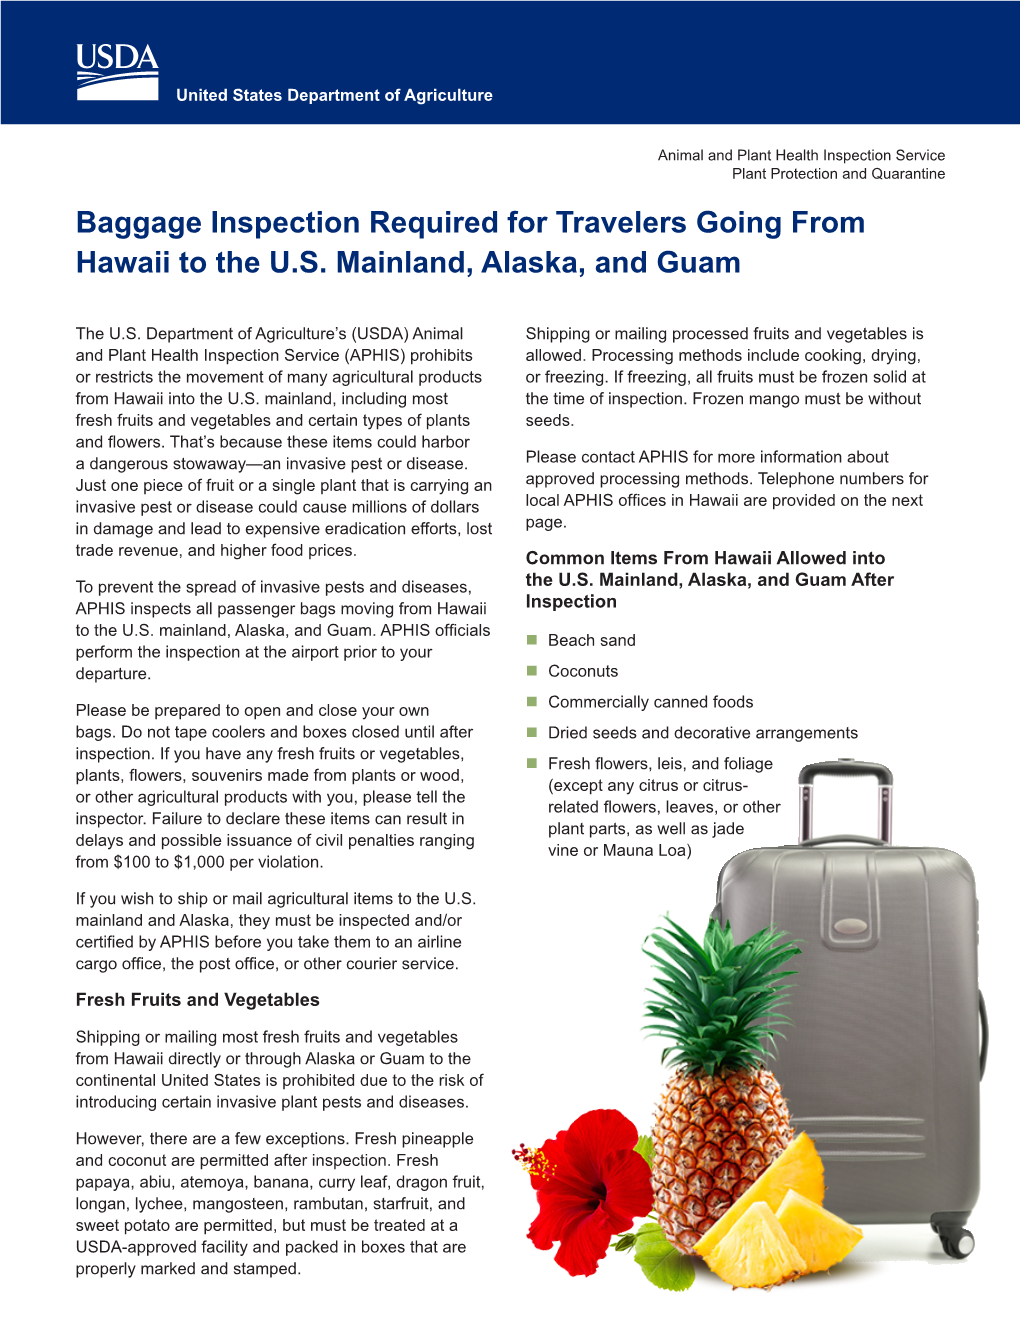 Baggage Inspection Required for Travelers Going from Hawaii to the U.S. Mainland, Alaska, and Guam